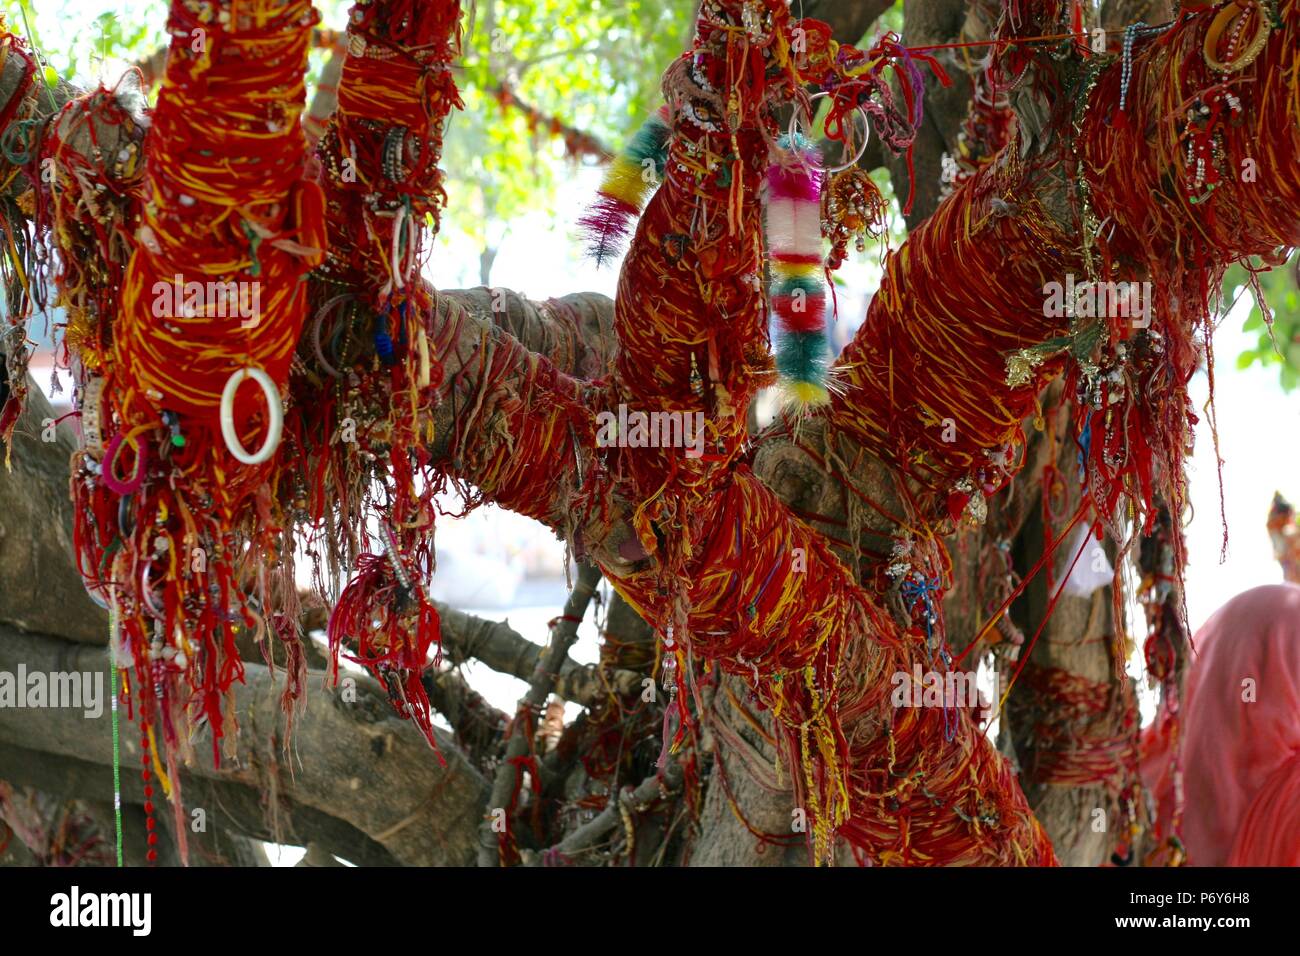 Tree at Om Banna Temple, Rajasthan - spirit bike kept returning to where it's owner died. By itself, so locals built a shrine and pay homage. India Stock Photo